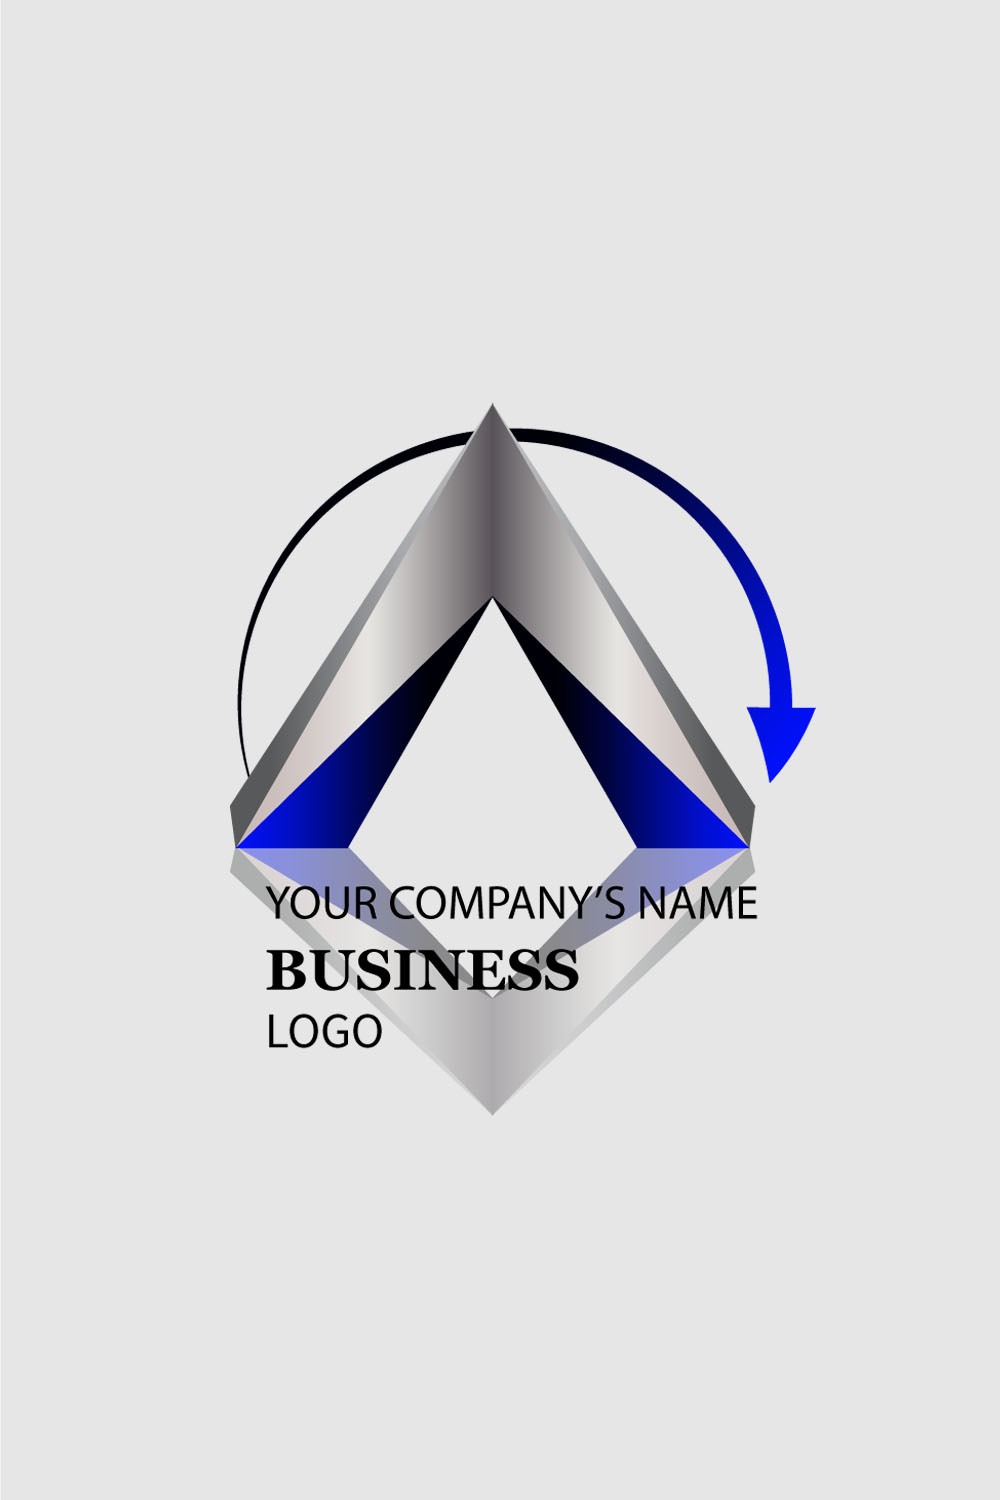 An image of an A-shaped logo with an exquisite design